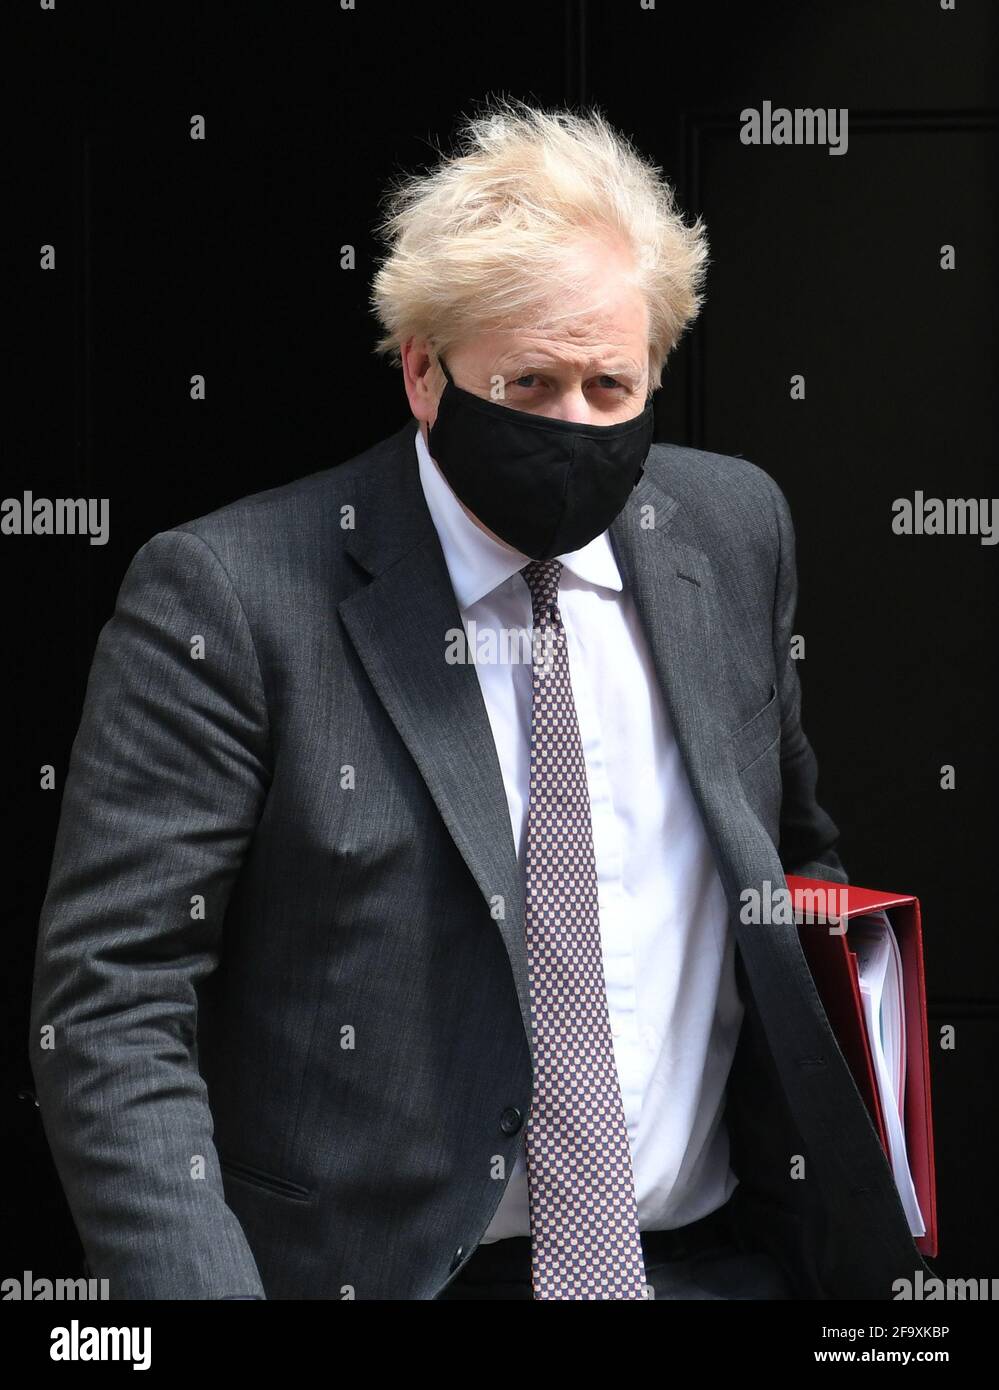 Prime Minister Boris Johnson leaves 10 Downing Street to attend Prime Minister's Questions at the Houses of Parliament in London. Picture date: Wednesday April 21, 2021. Stock Photo